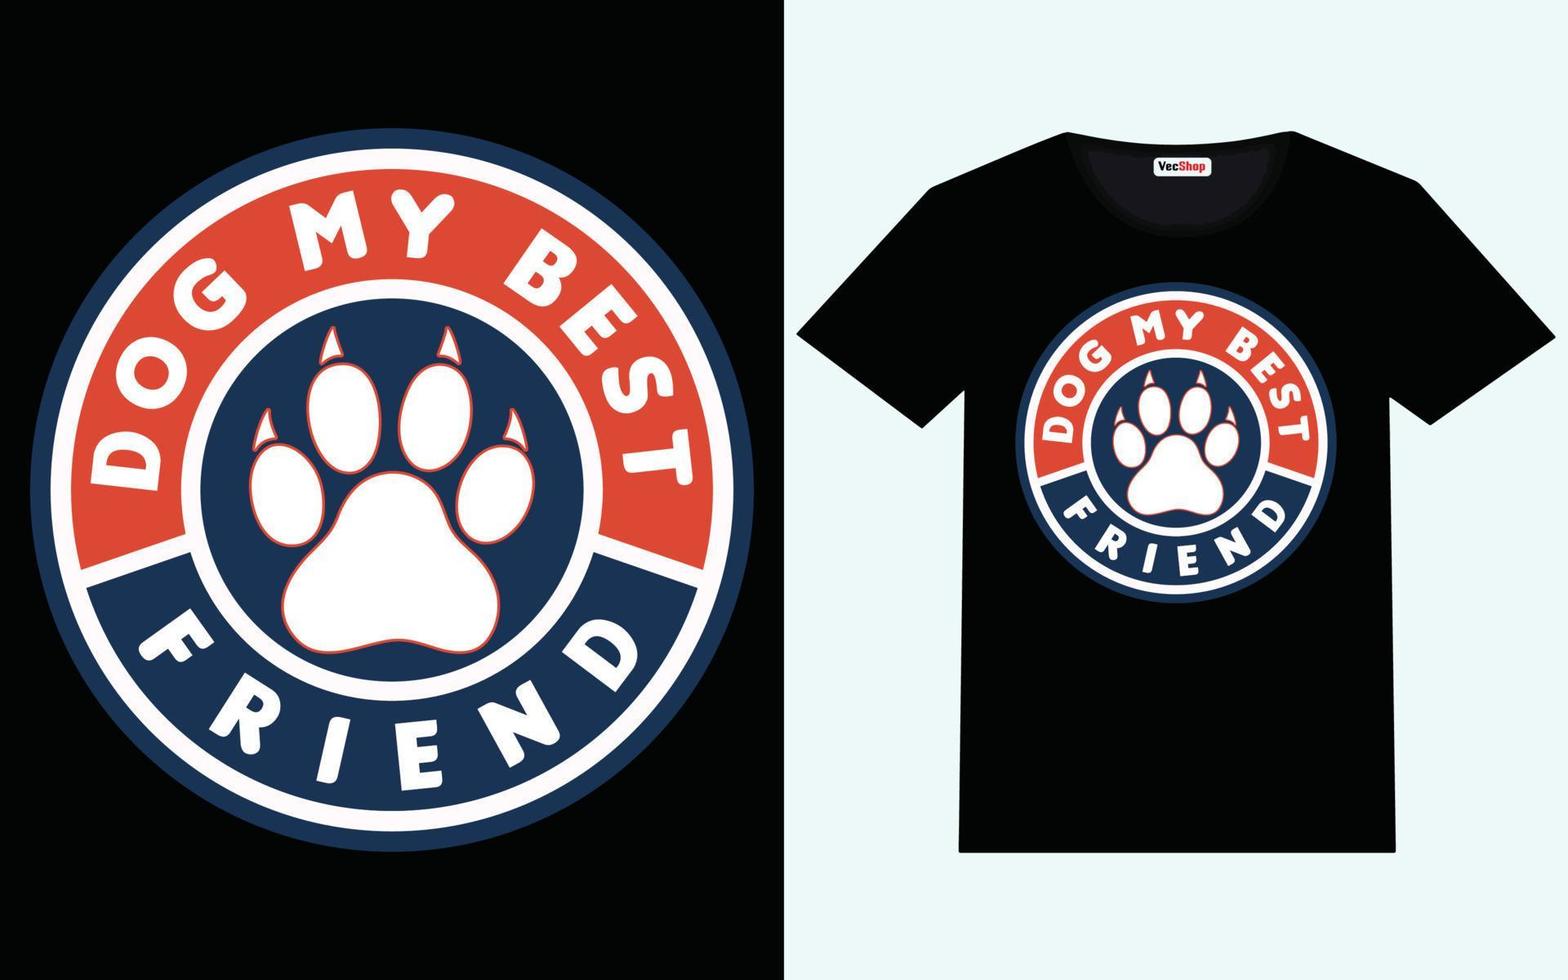 Dog t-shirt design graphic vector and typography design